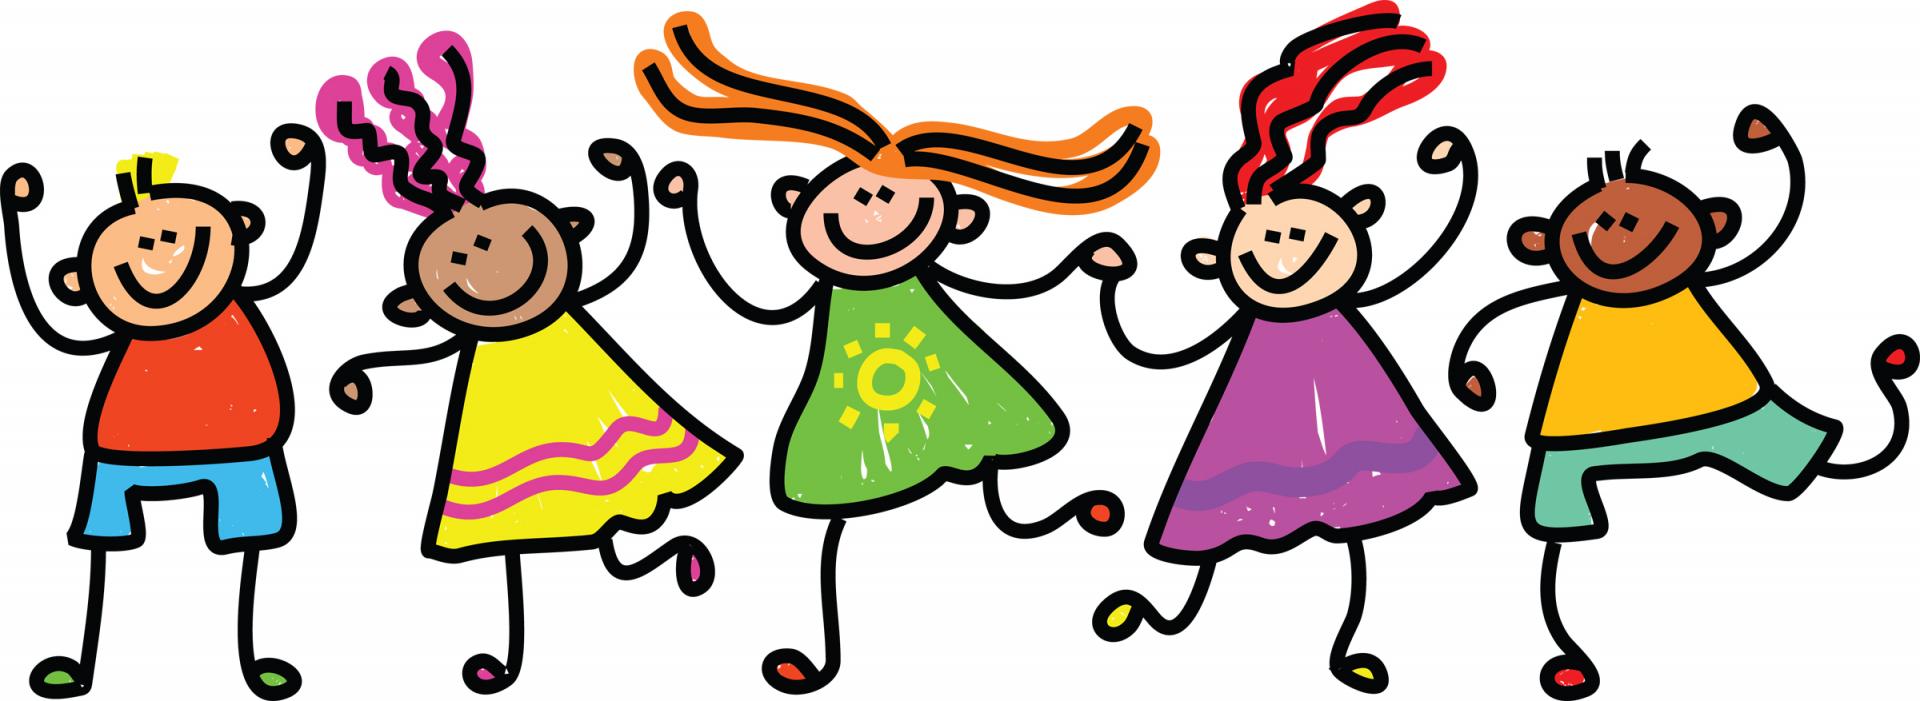 Celebration clip art free. Excited clipart happy life